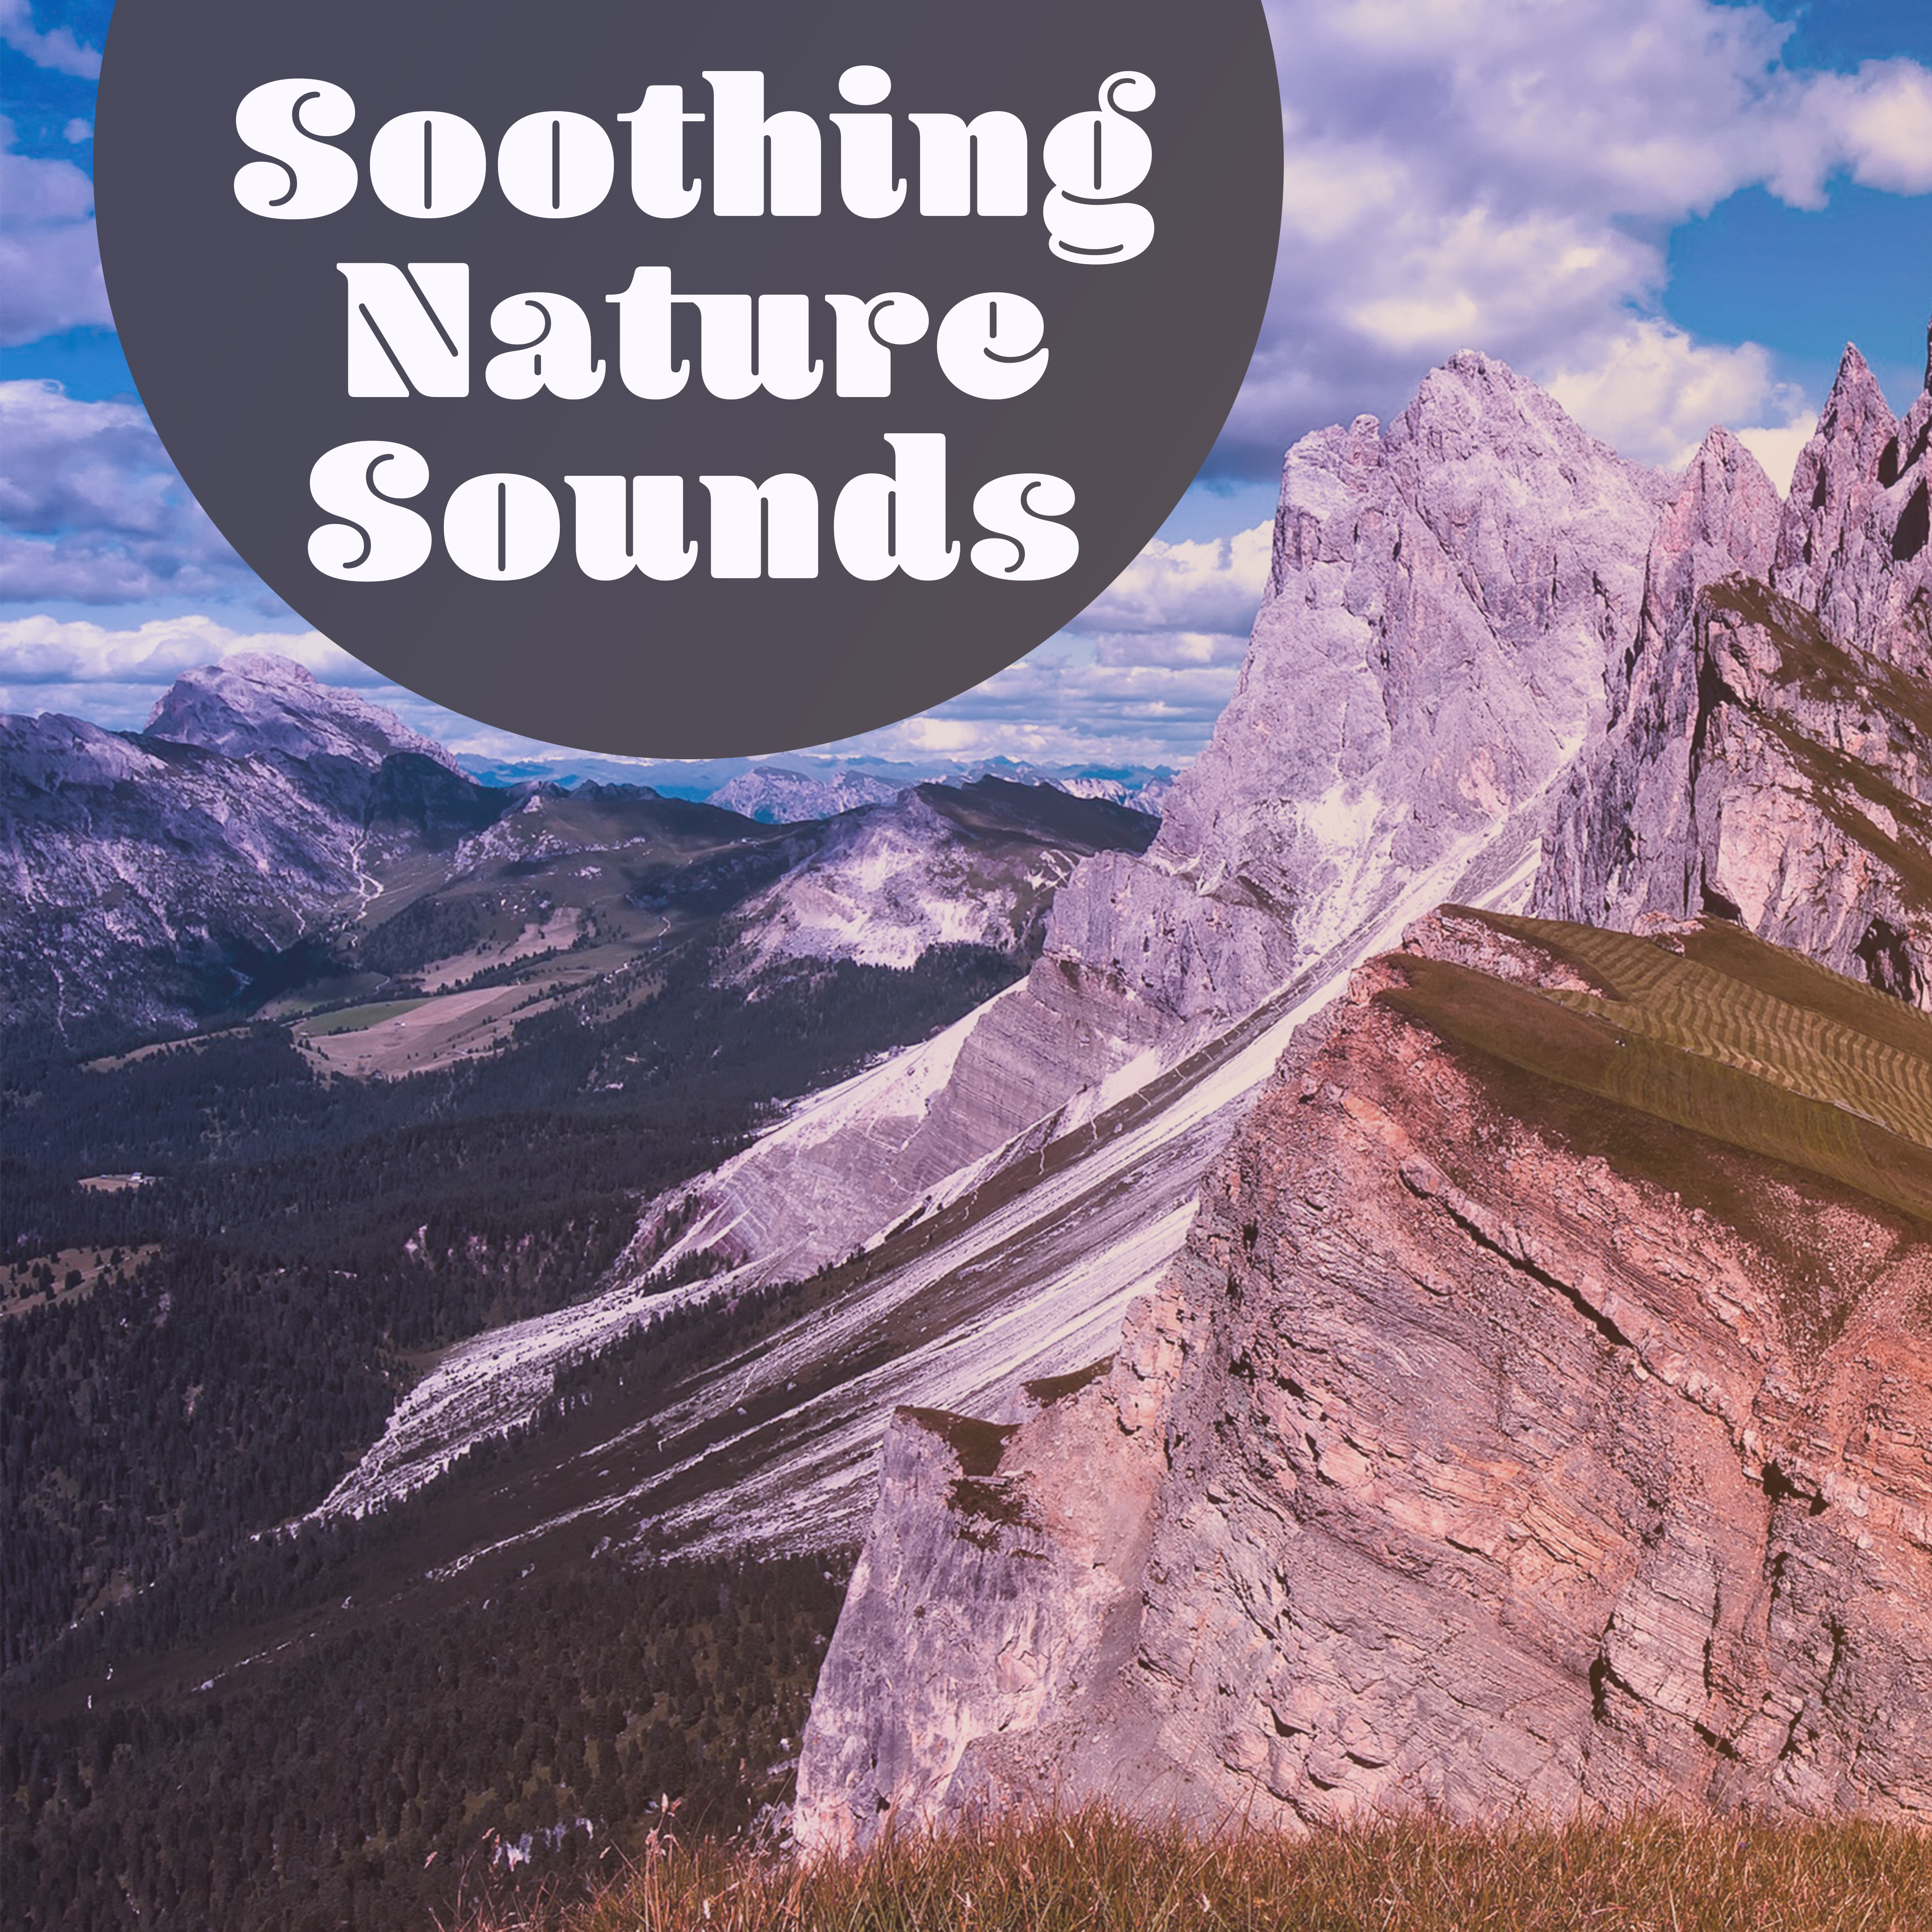 Soothing Nature Sounds  Forest Music, Melodies of Sea, Calm Mind, Pure Sleep, Zen, Relaxation, Gentle Guitar